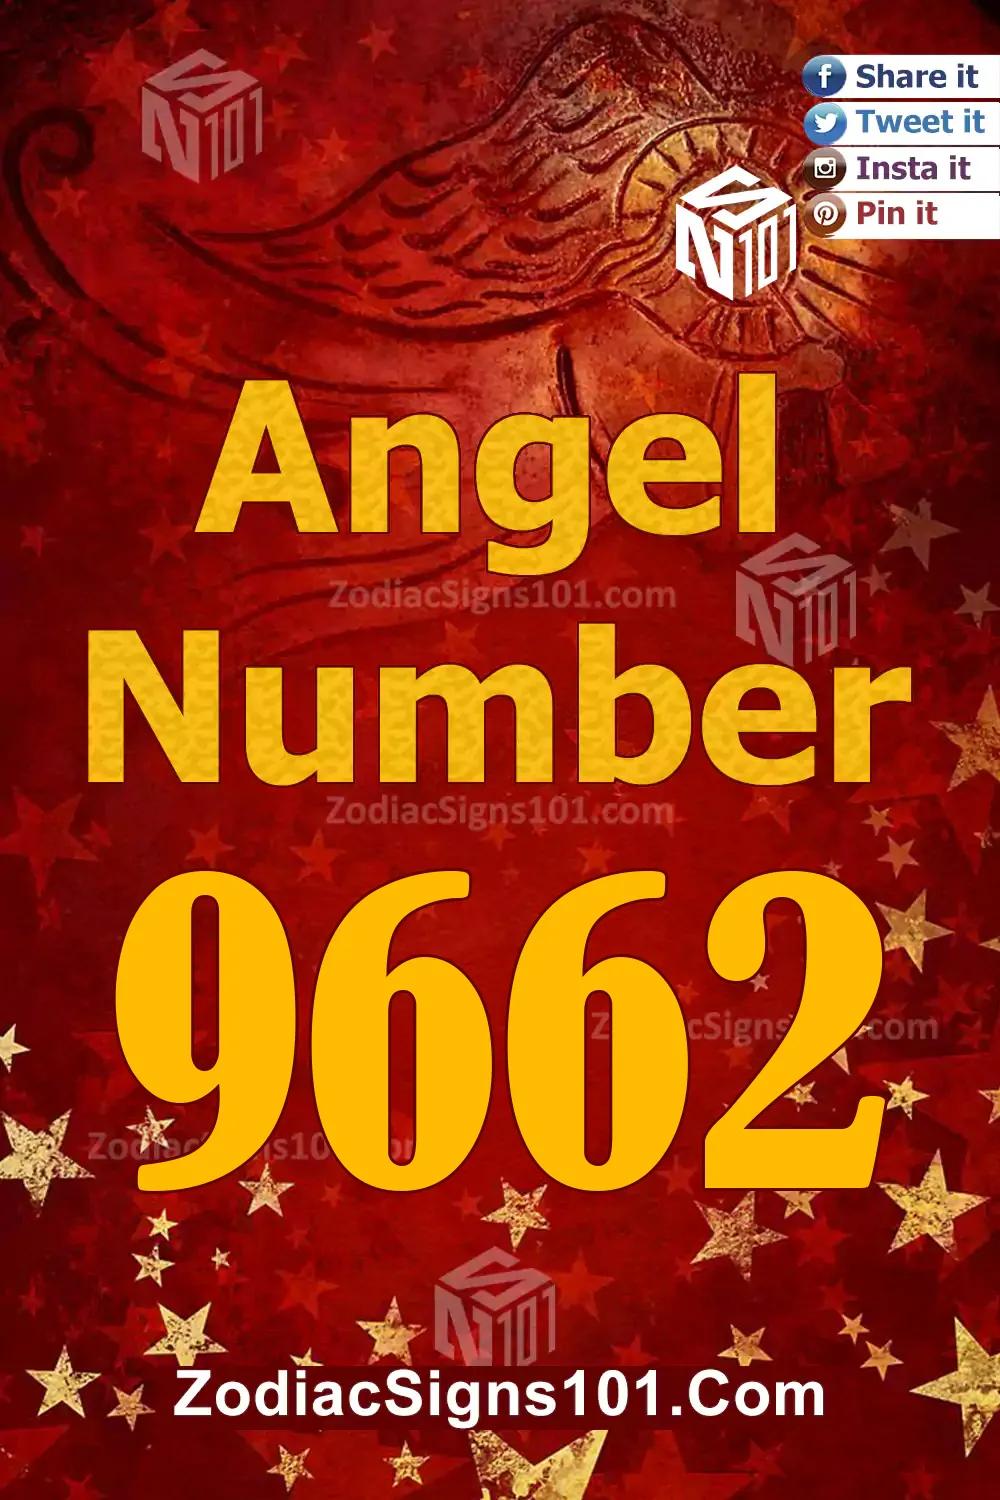 9662 Angel Number Meaning